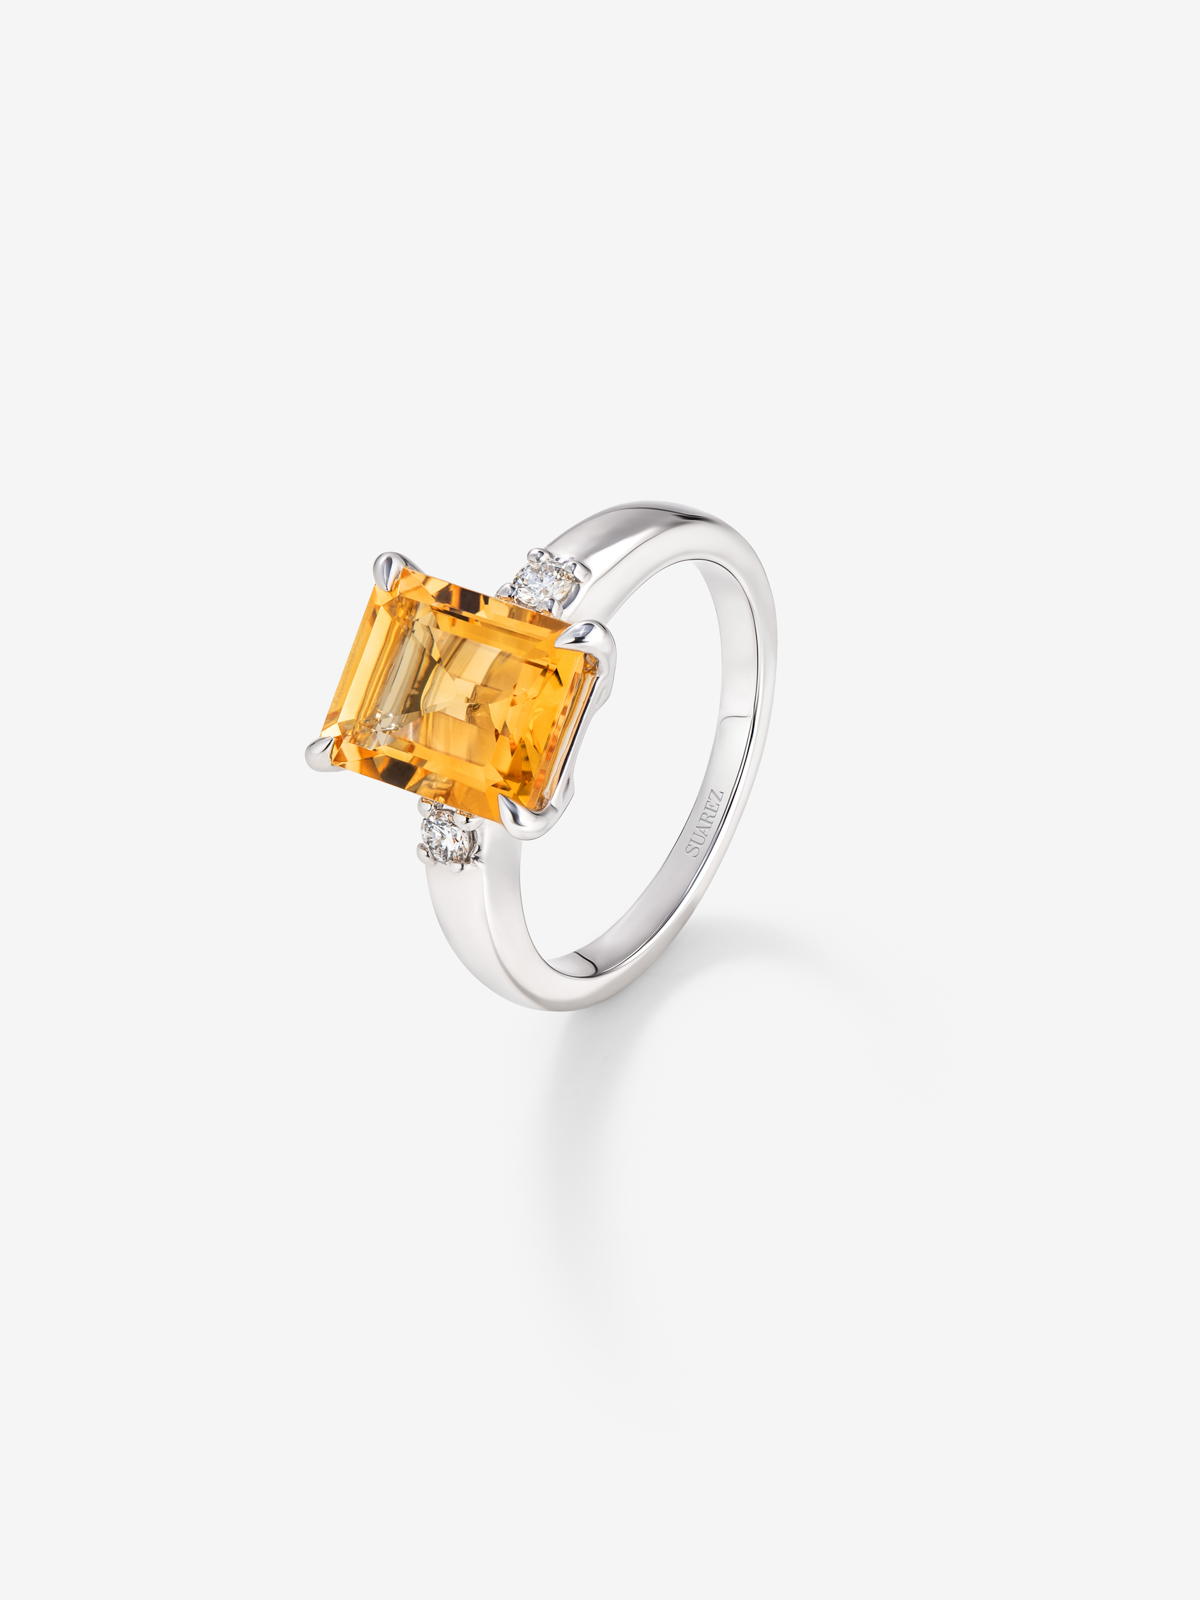 925 silver ring with citrine quartz in emerald size 2.86 cts and white diamonds in 0.09 cts bright size